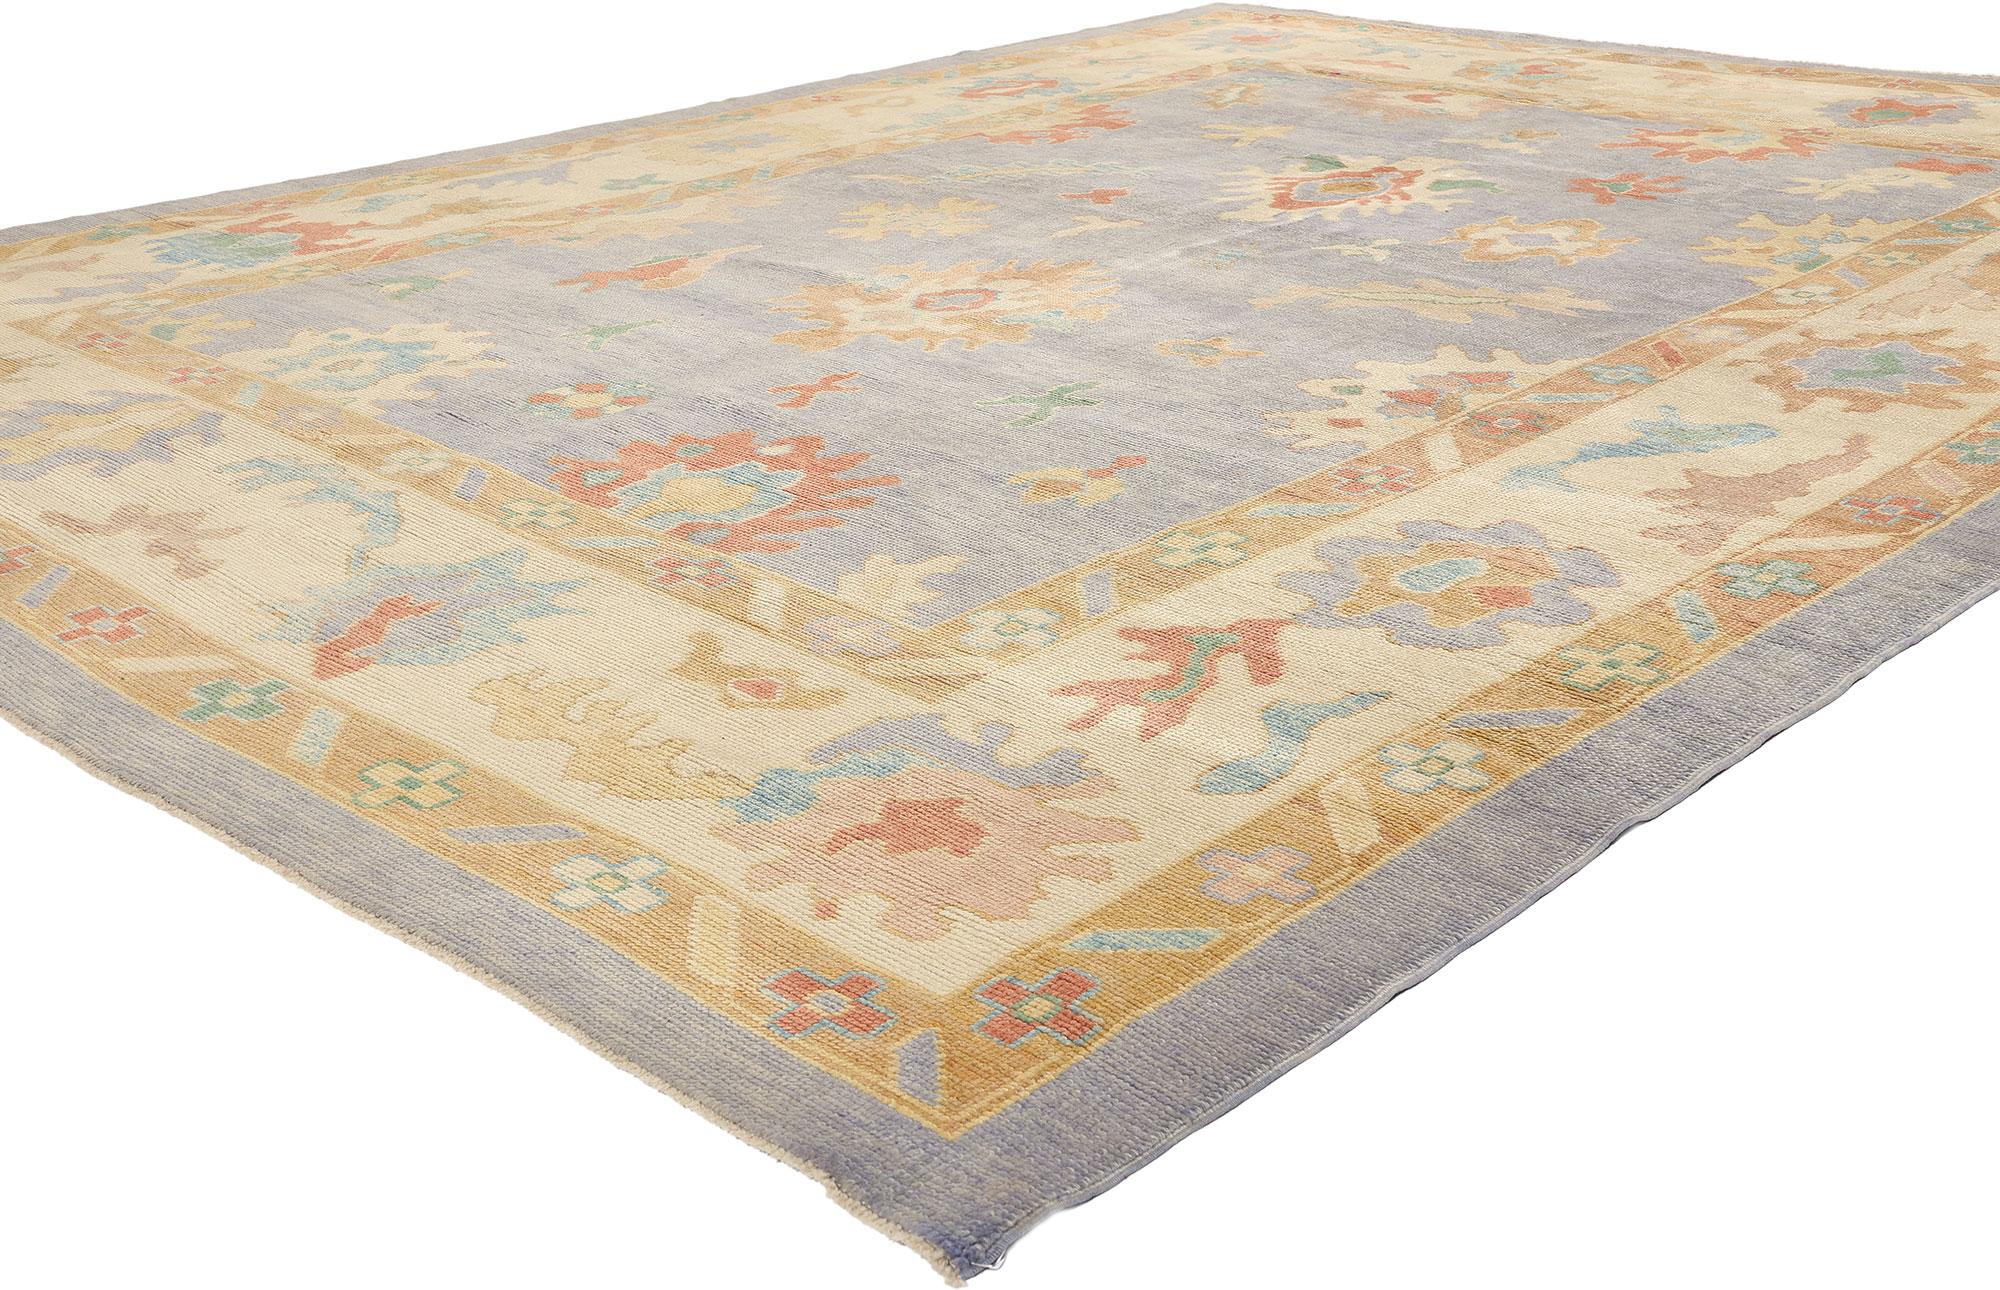 52164 Modern Turkish Colorful Oushak Rug, 09'05 x 12'05. In this hand-knotted wool colorful Turkish Oushak rug, playful sophistication intertwines with polished Anatolian charm to create a captivating fusion of styles. The Oushak rug's allover